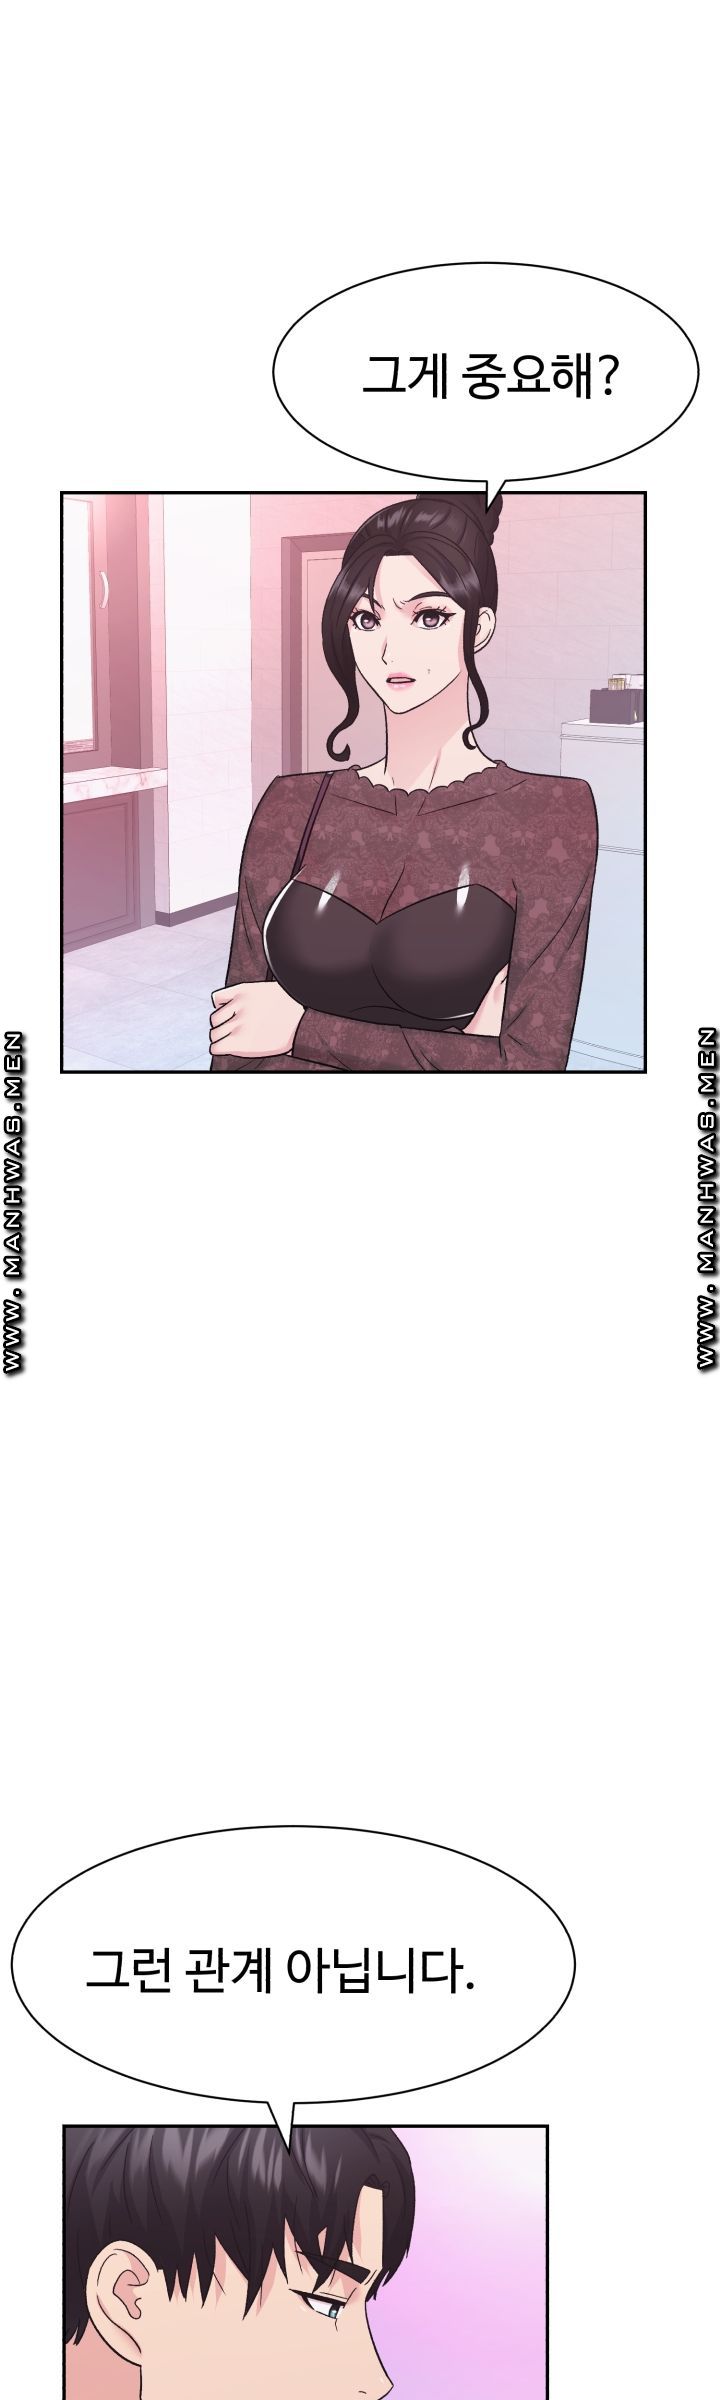 Lingerie Business Division - Chapter 14 Page 13